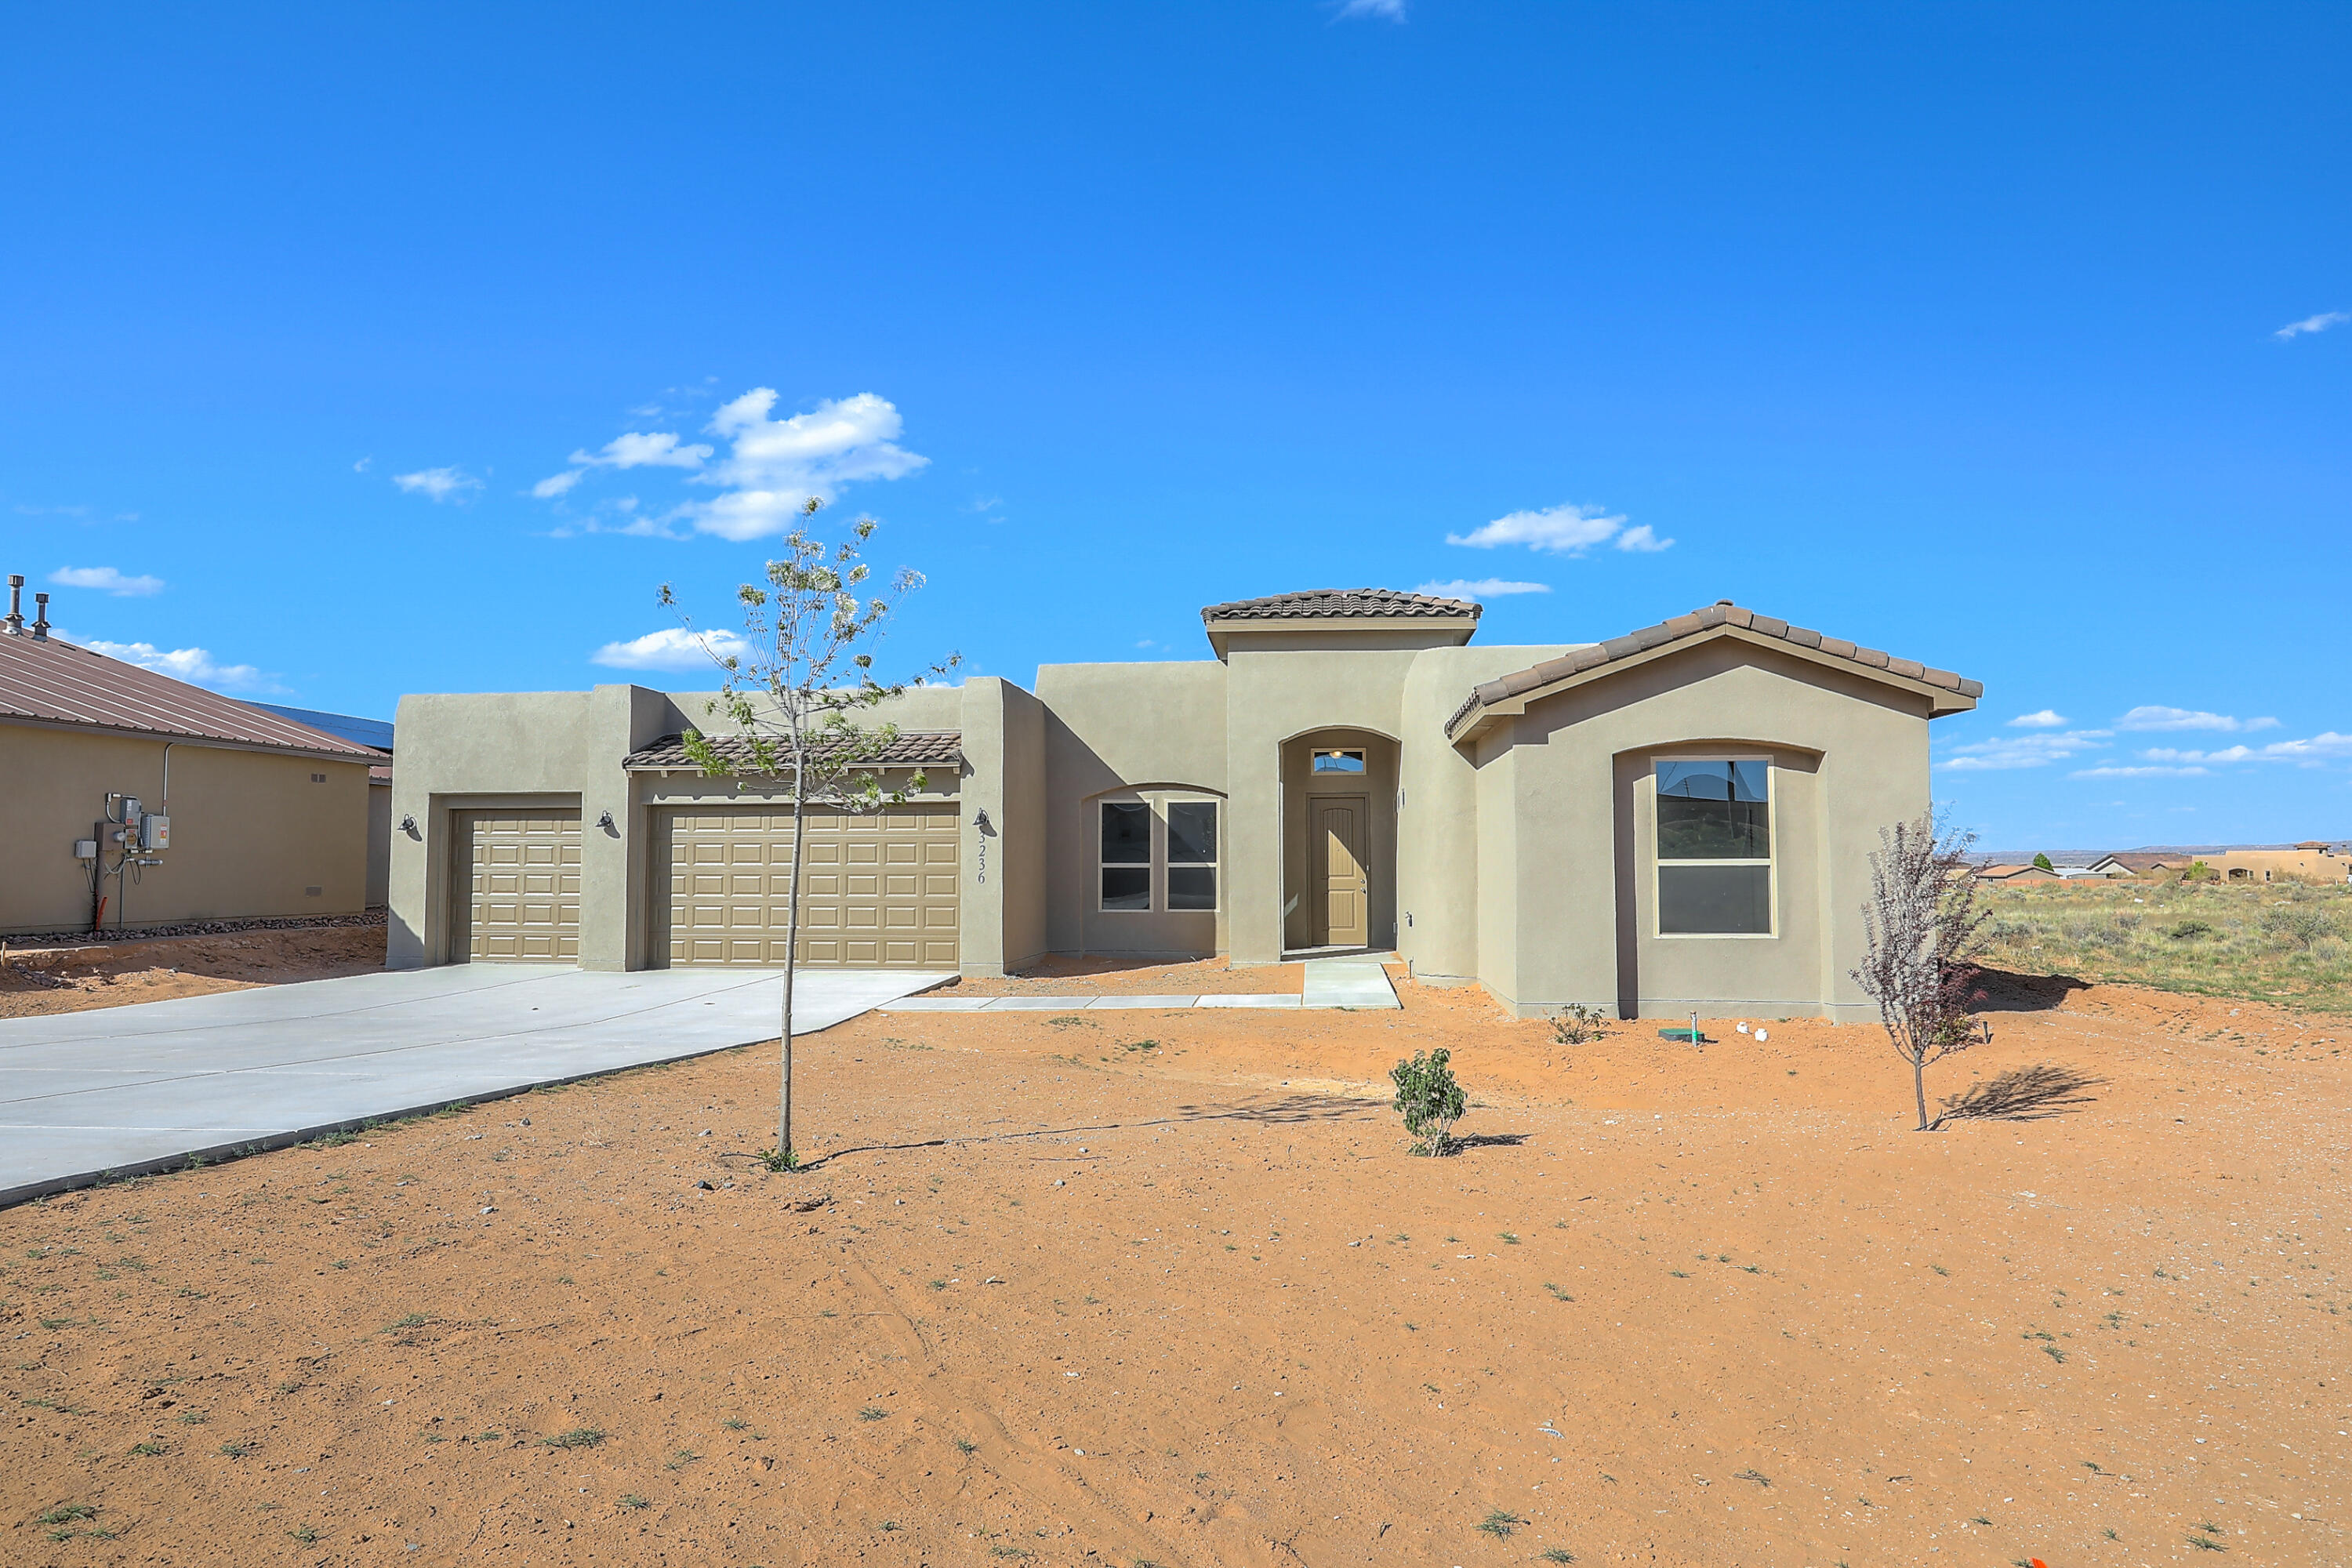 Newly Completed New Construction. This gem sits on a half acre with paved roads, all city utilities, and a view of the Sandias from your back patio. The home features a separate wing for bedrooms 2 and 3, while the master enjoys views out the back.***Builder will contribute up to 2% of buyer's loan amount towards buyer's closing costs with a full price offer. Come check out this home today or talk with the listing broker about your options to build.